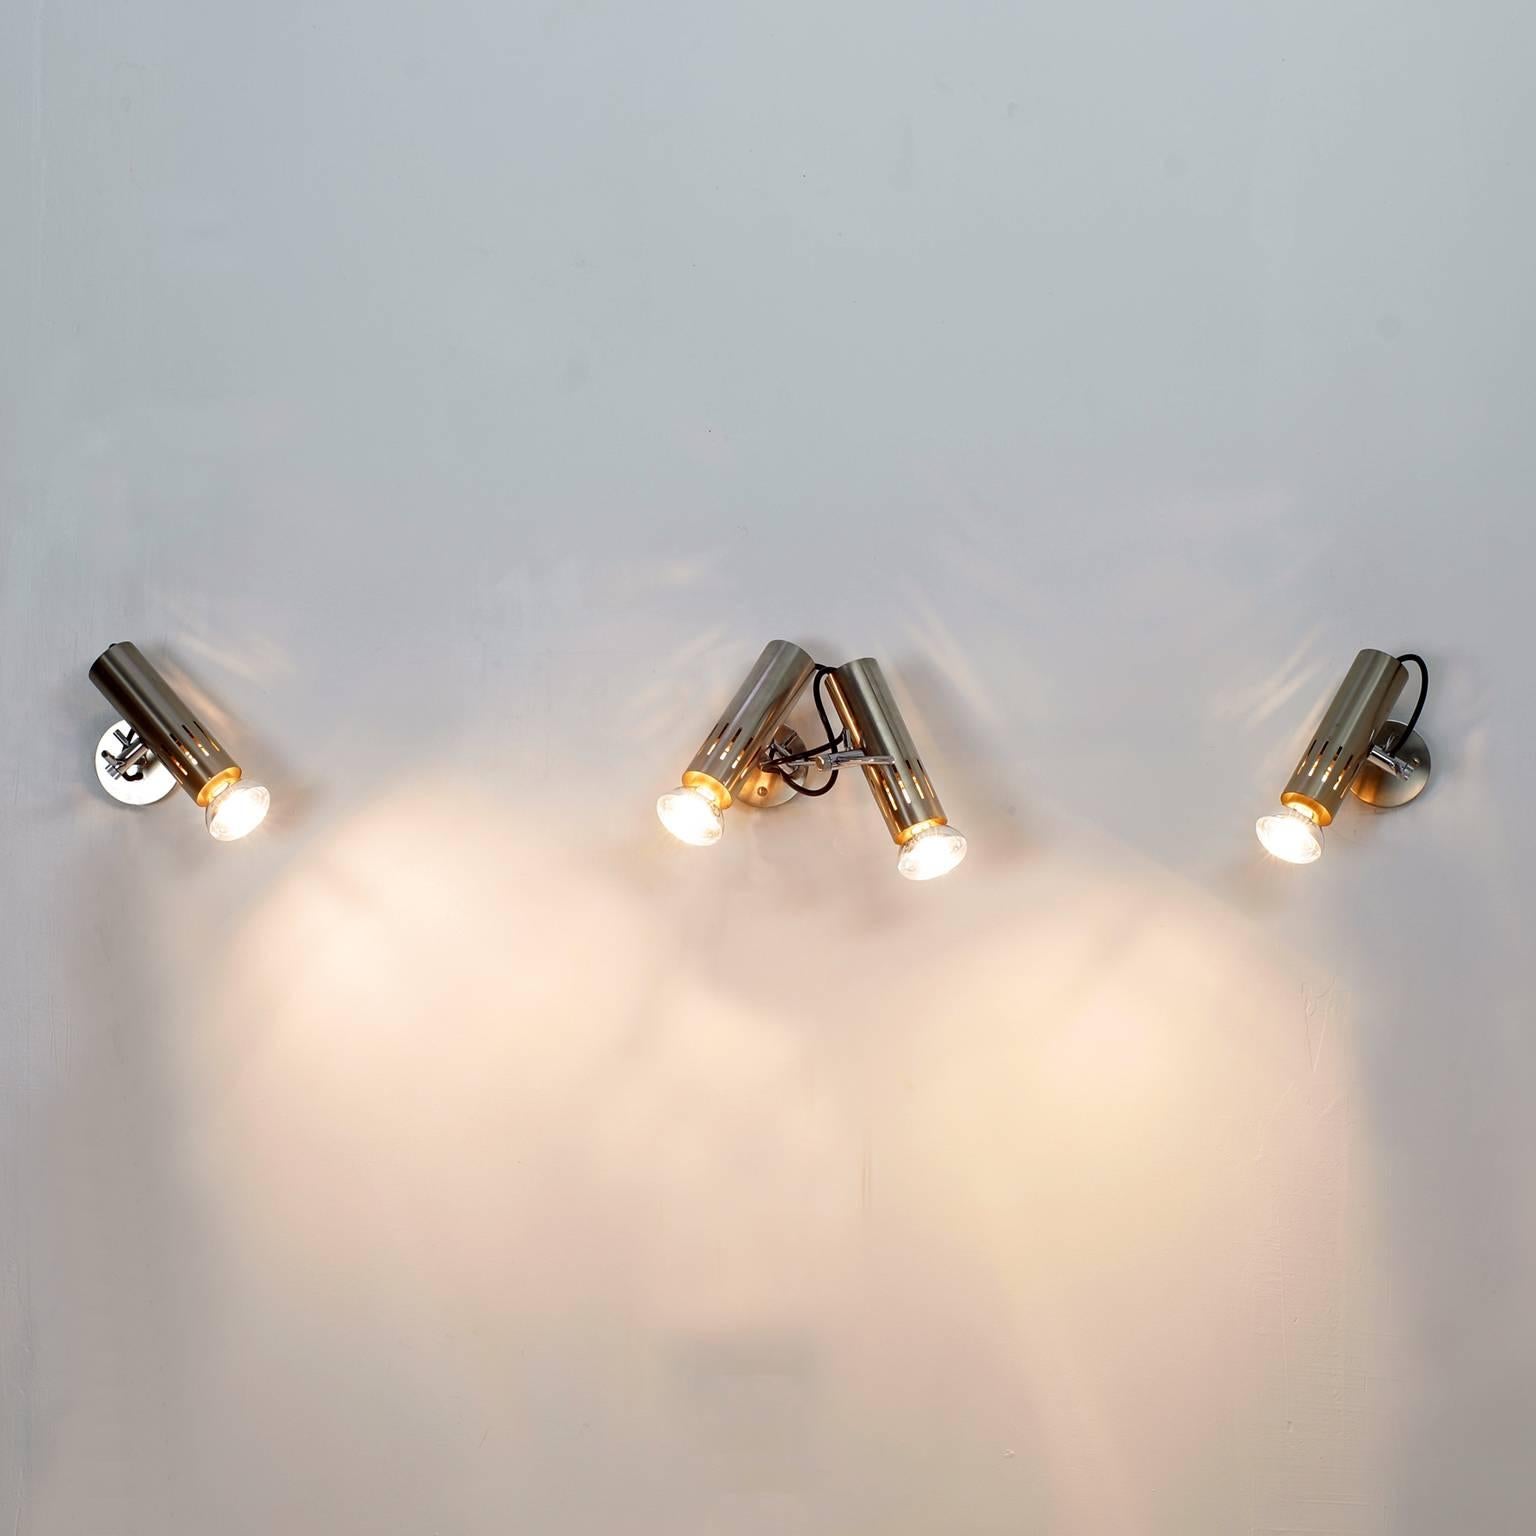 Set of three Alain Richard sconces for Disderot 1960s. Brushed metal adjustable spots on a chrome-plated steel rod.
One double wall lamp and two simple wall lamps.